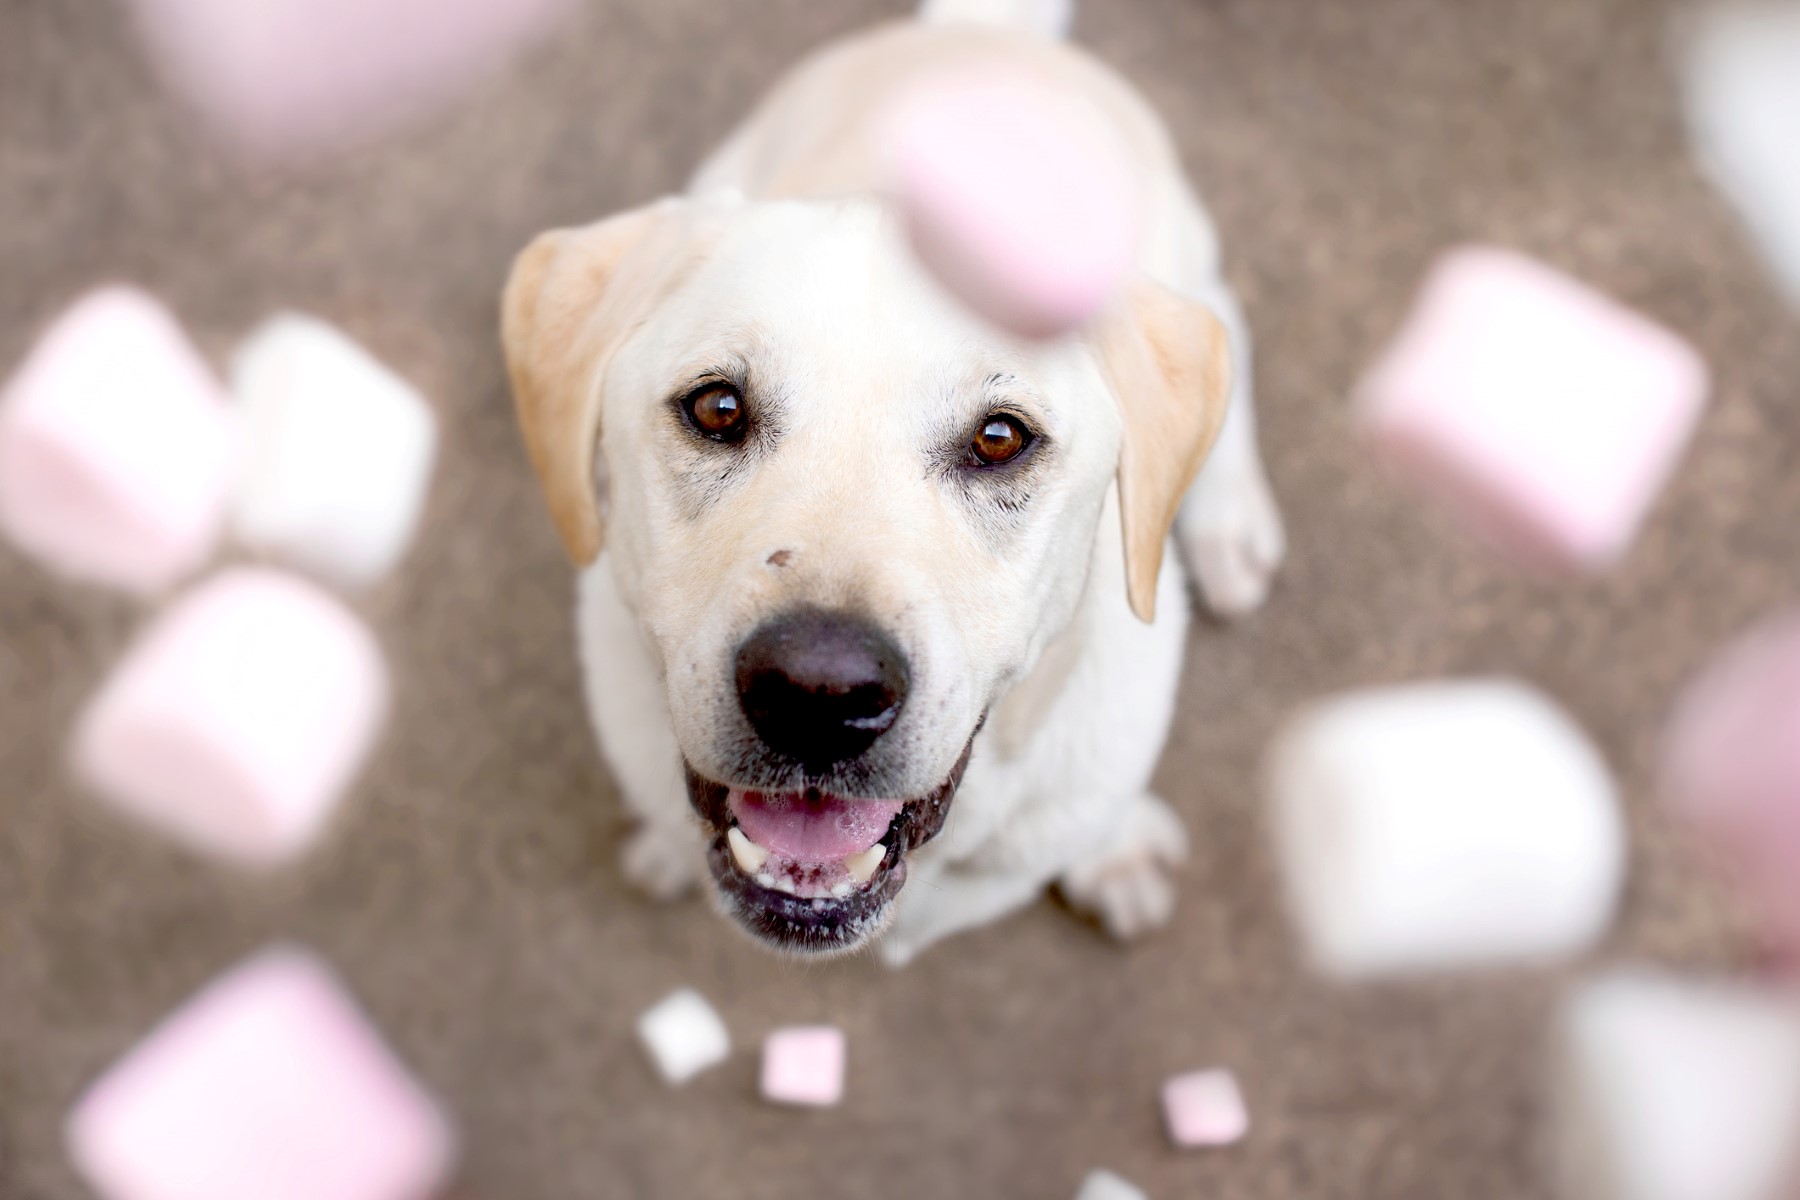 The Surprising Truth About Feeding Dogs Marshmallows